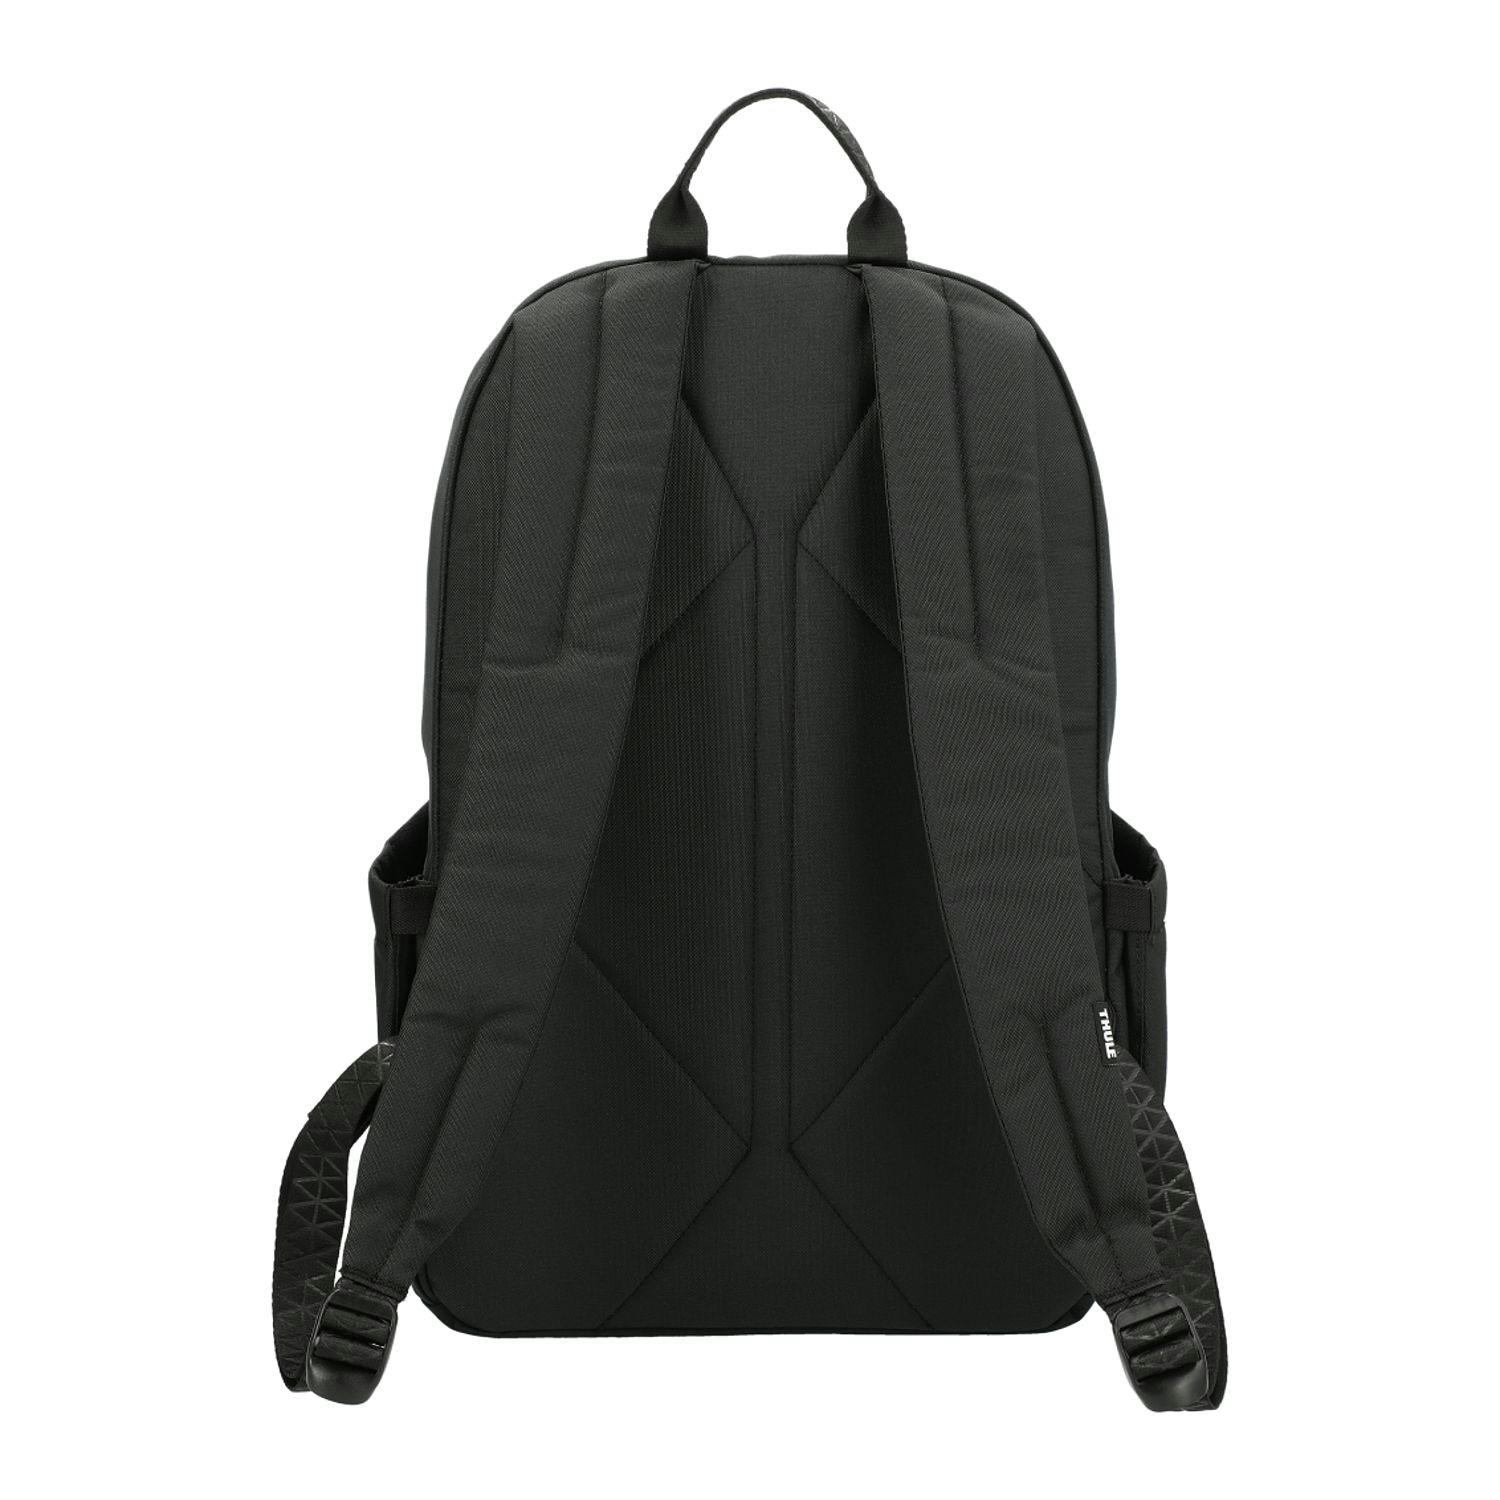 Thule Heritage Notus 15" Computer Backpack 20L - additional Image 1